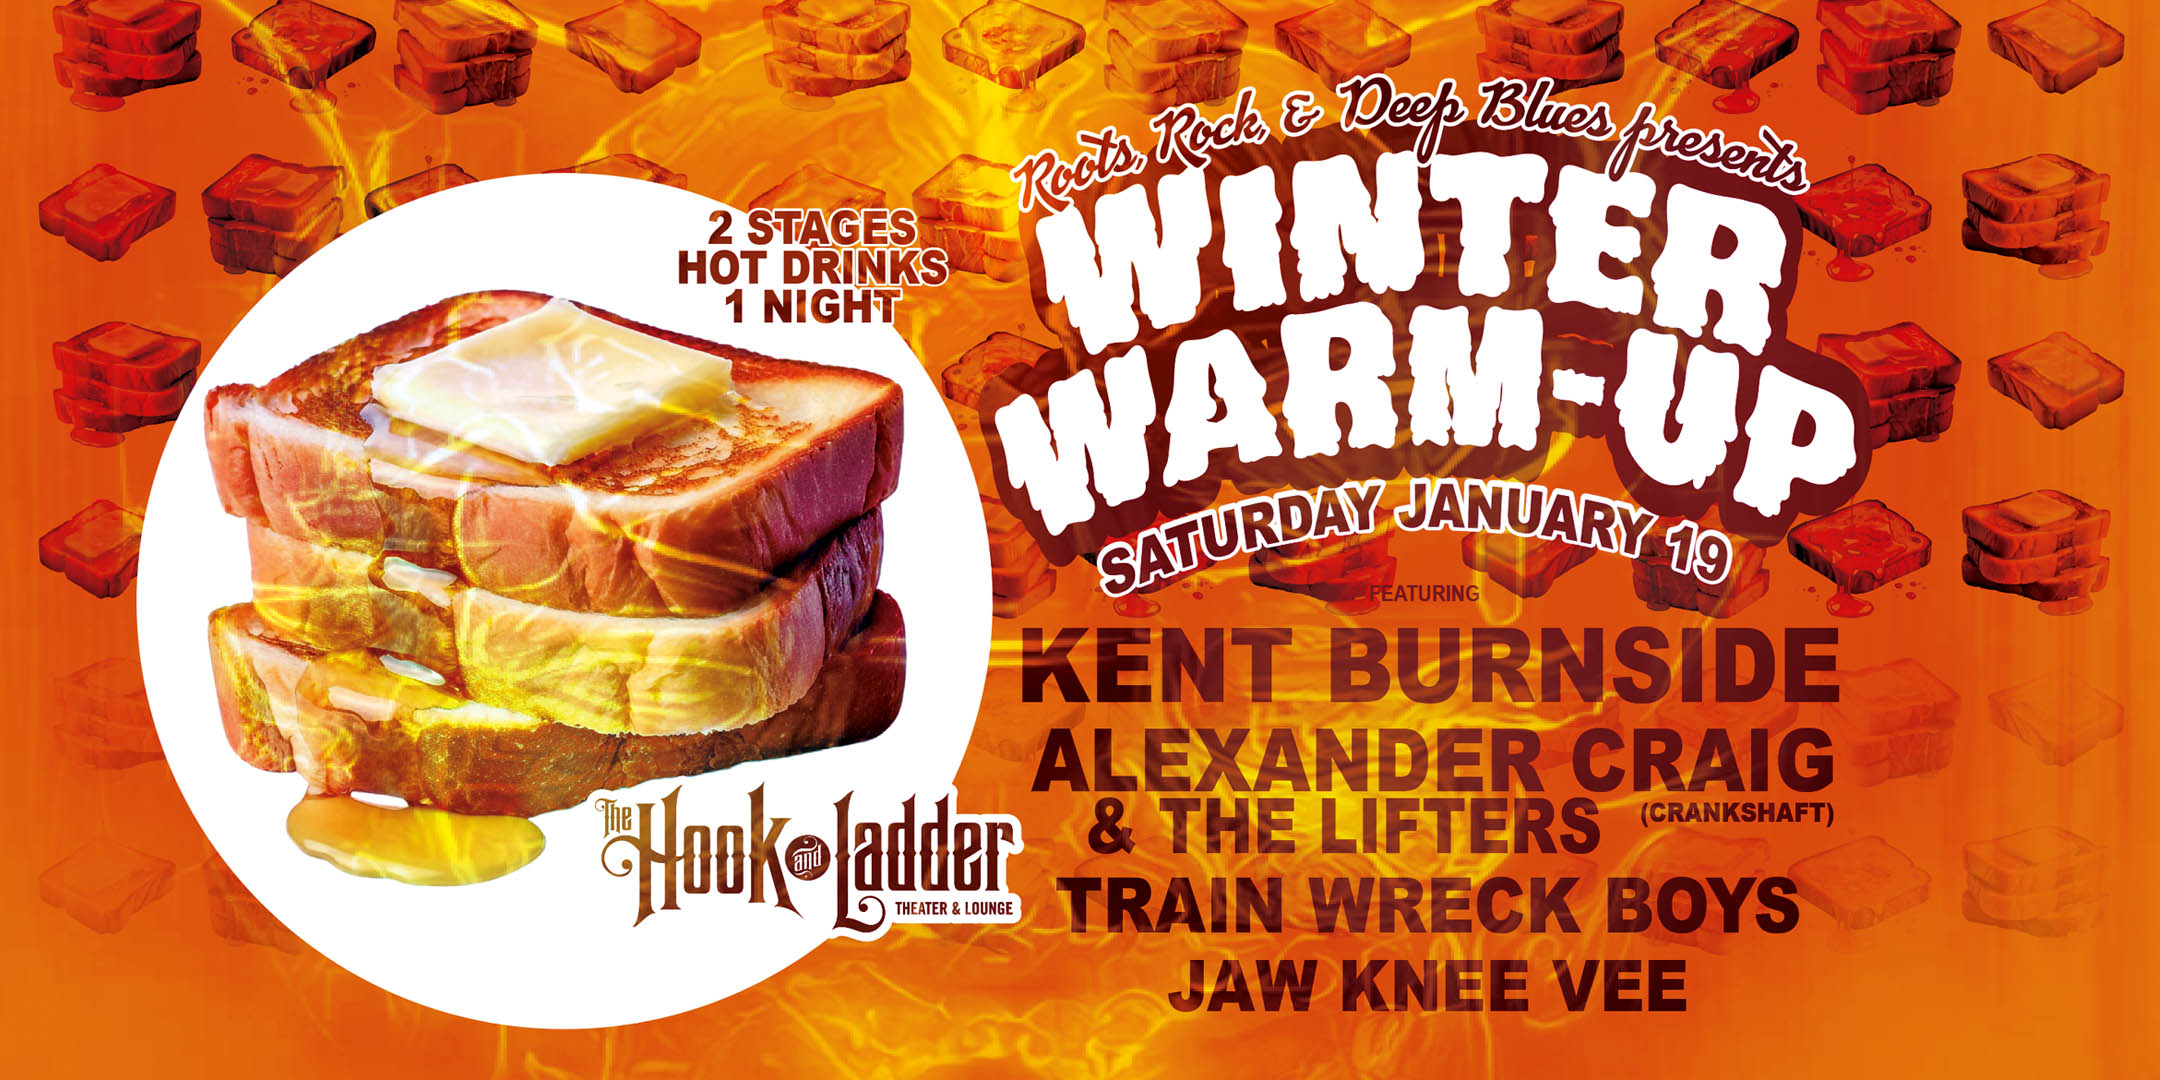 Roots, Rock, & Deep Blues presents RRDB Winter Warm-Up featuring Kent Burnside, Alexander Craig & The Lifters (Crankshaft), Train Wreck Boys, & Jaw Knee Vee Friday, January 19 The Hook and Ladder Theater Doors 7:00pm :: Music 7:30pm :: 21+ $17 ADV / $22 DOS